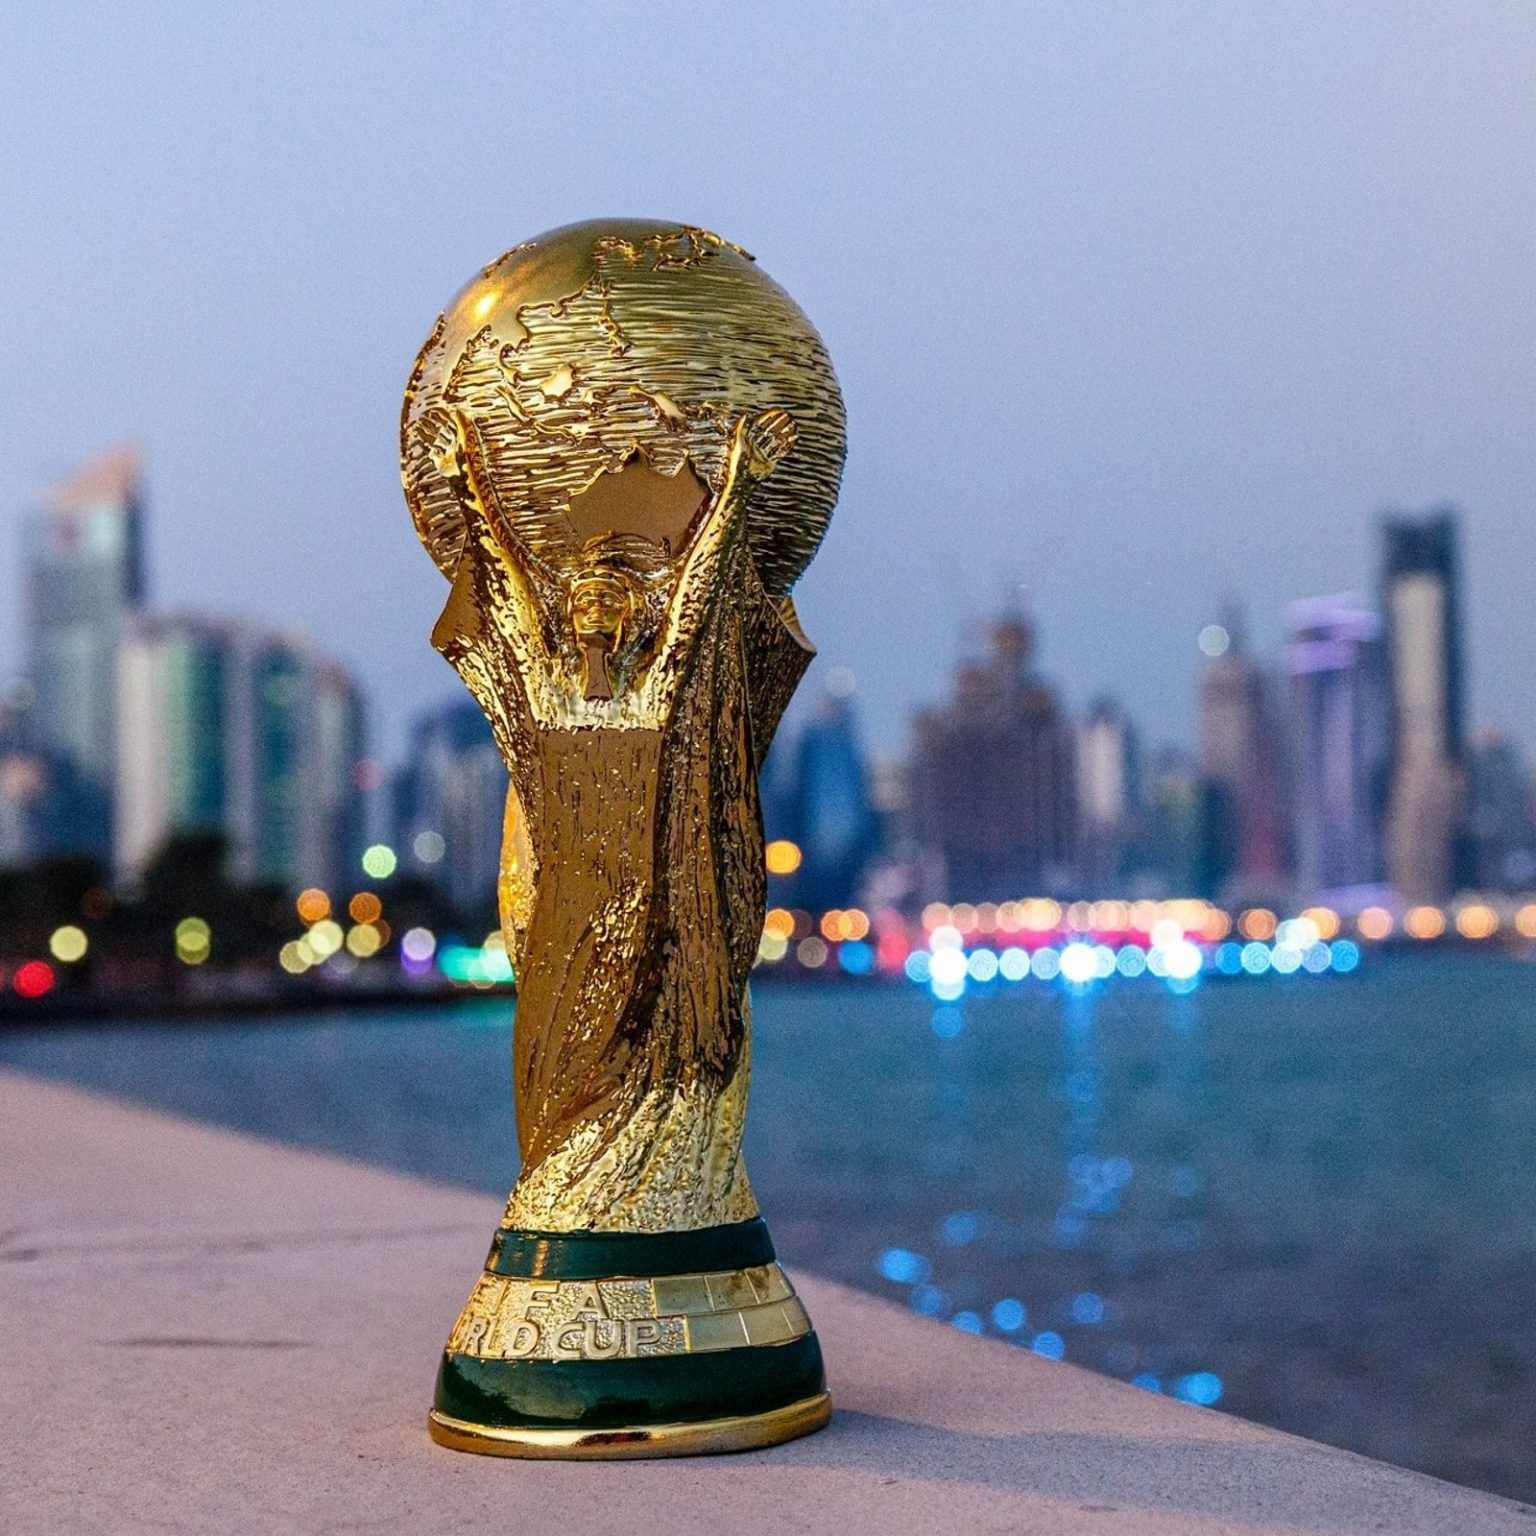 Original FIFA World Cup Trophy Arrives in Doha What's Goin On Qatar